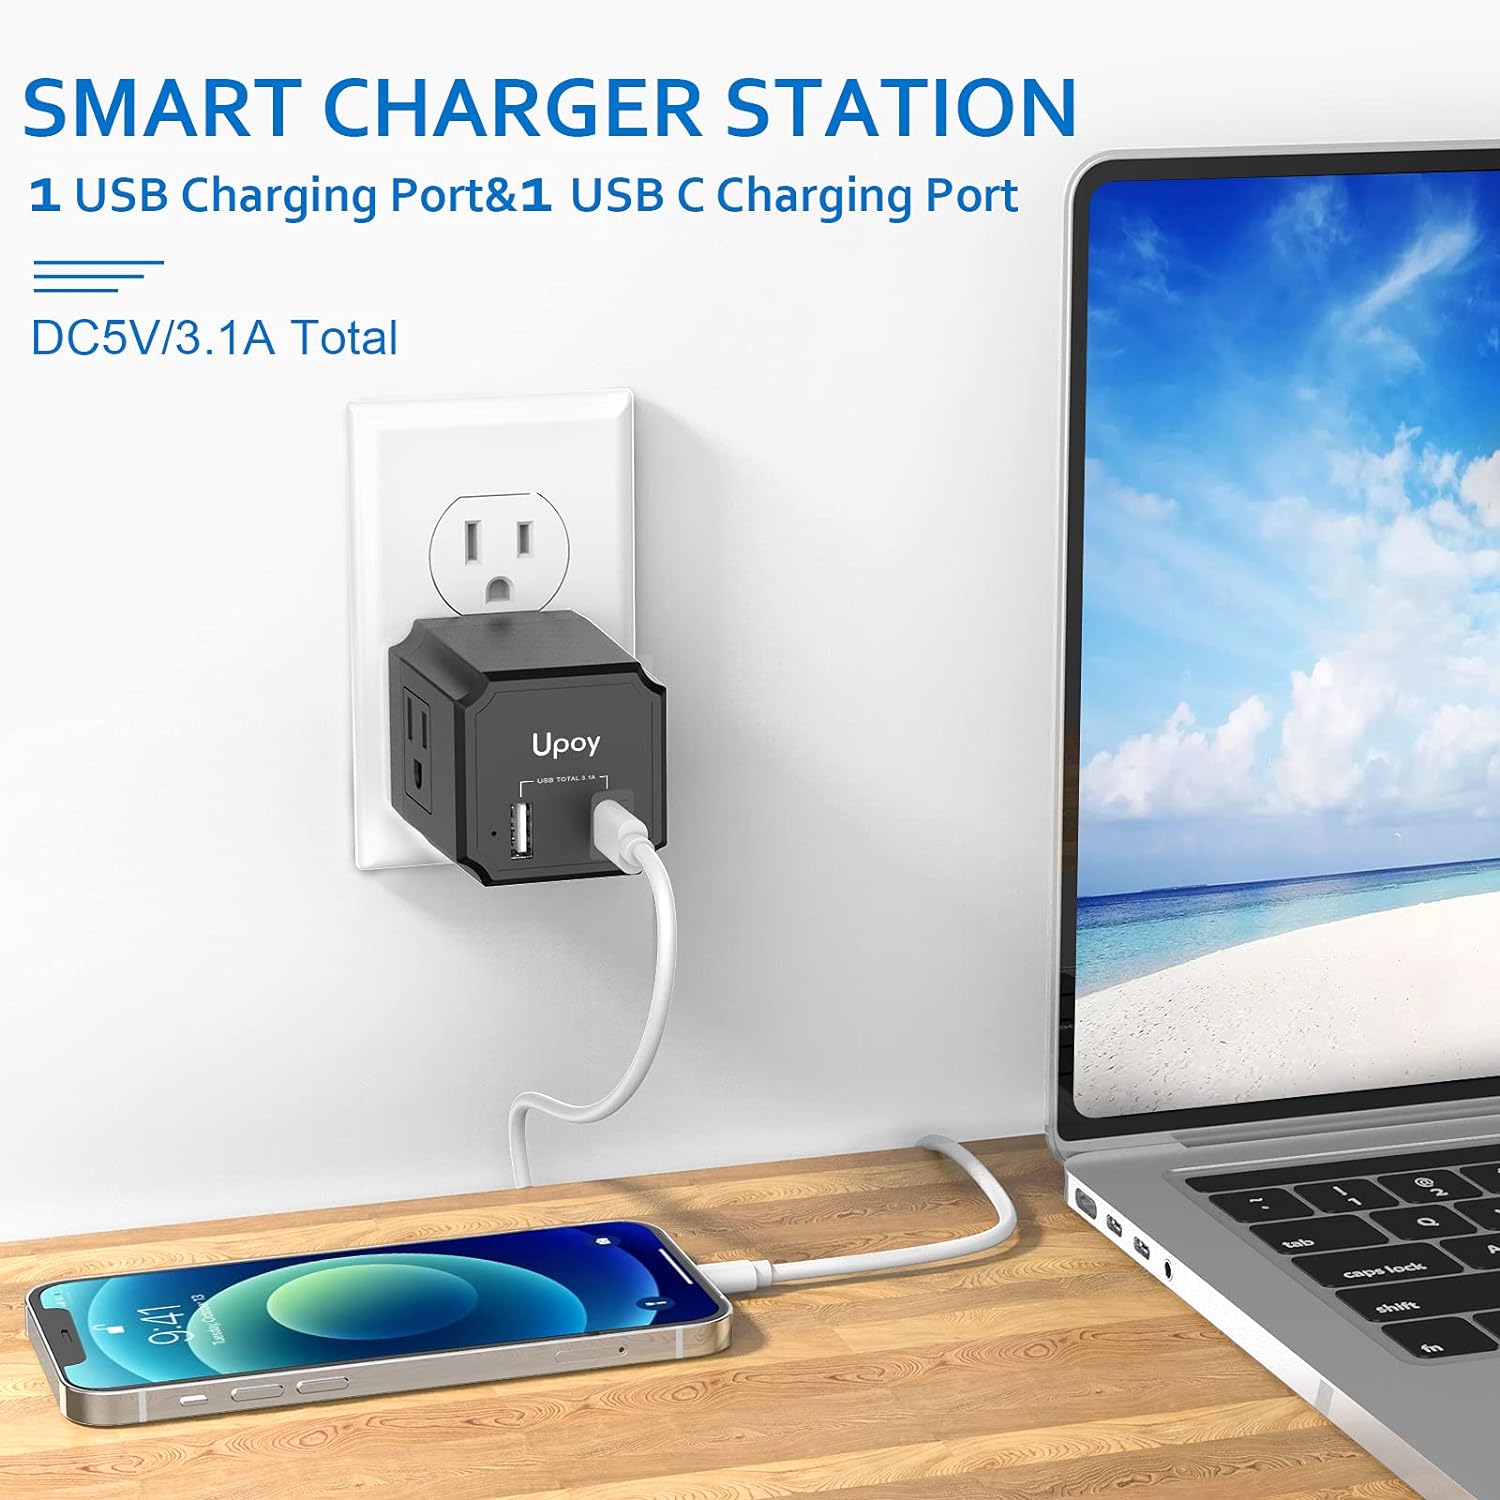 USB Charging Station with Outlets Upoy, Outlet Extender 1875W, Charging Cube Dual USB Ports Total 3.1A, C Port Block with 3 Wall Outlets, Power Adapter 3 Prong, Tech Gadget for Multiple Electronics